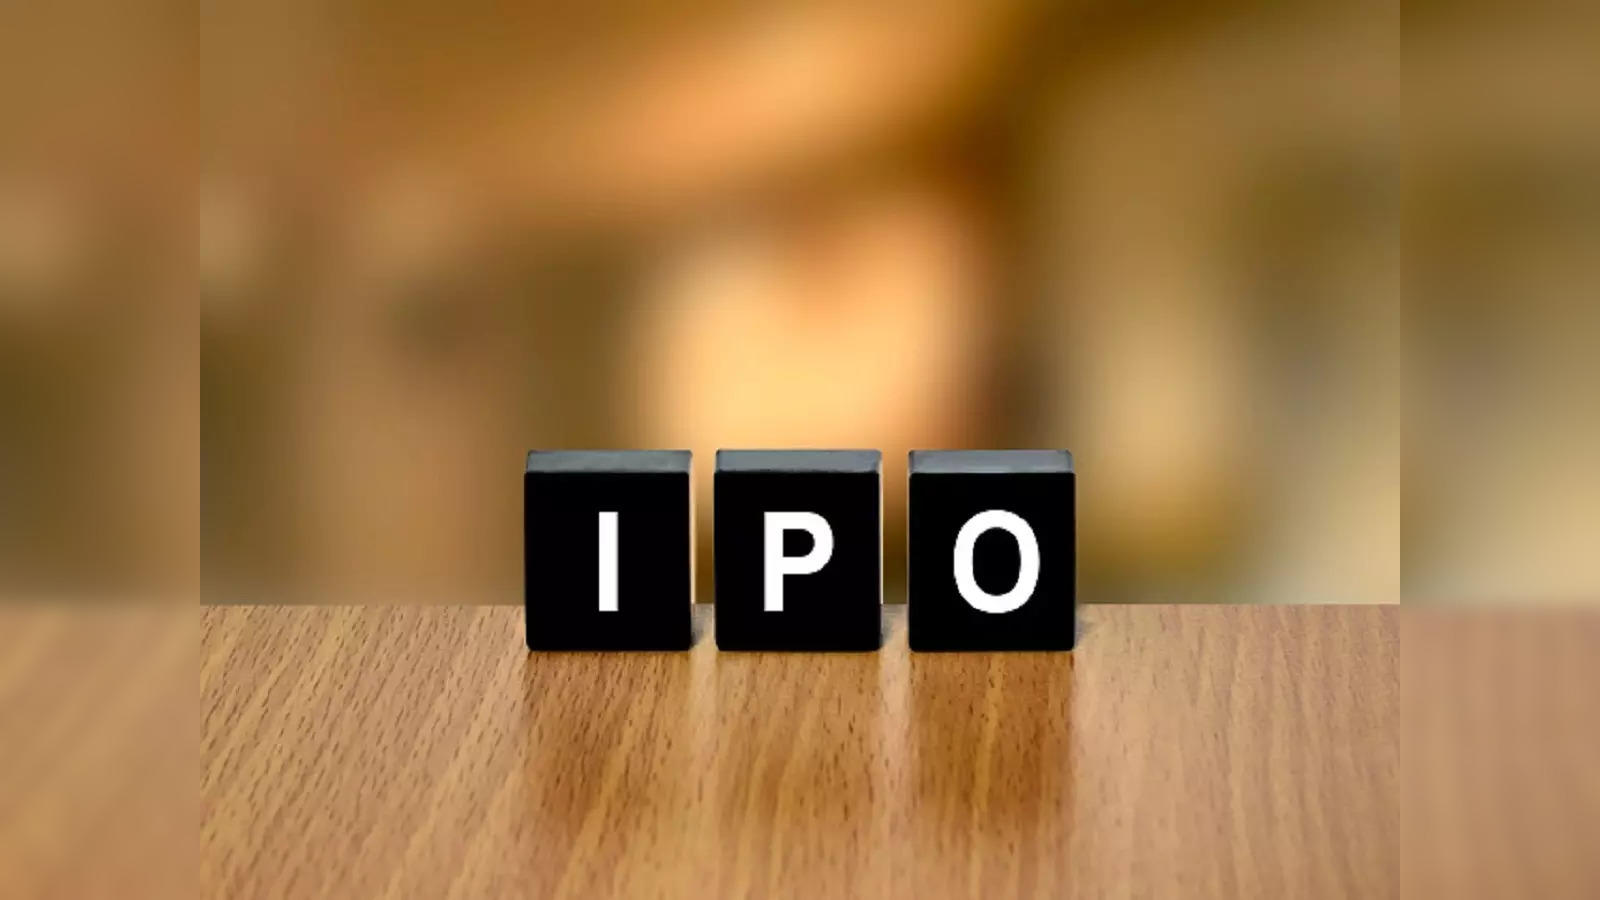 jyoti cnc automation ipo price band fixed at rs 315 331 per share check details